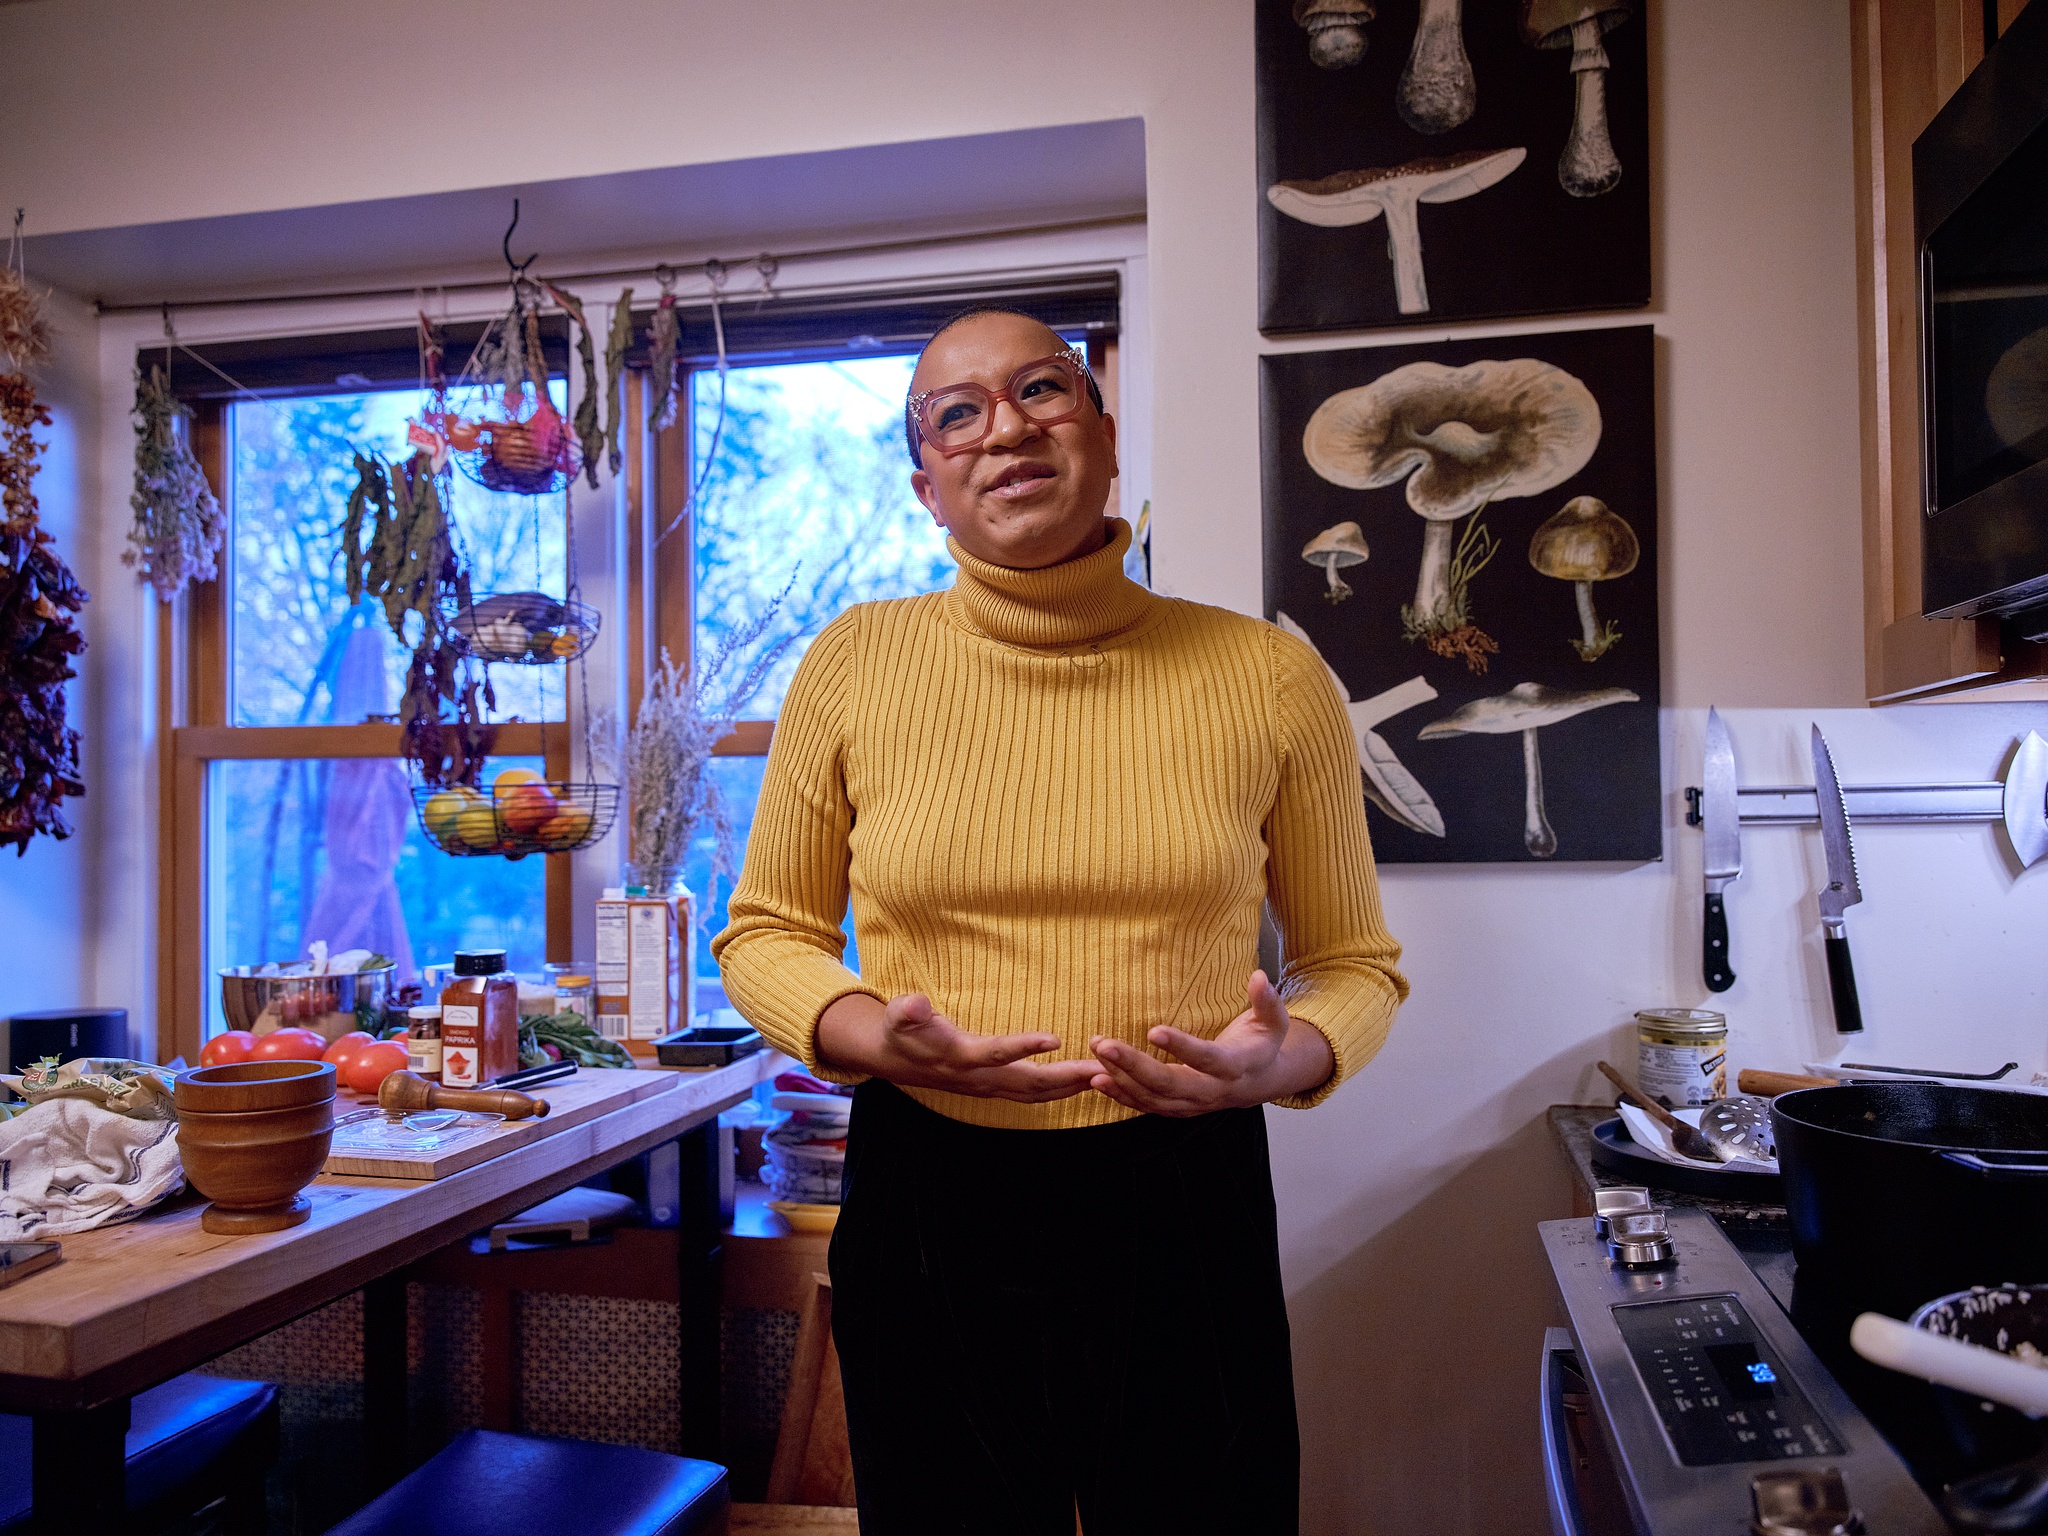 Black woman with yellow turtleneck and pink glasses stands between stove and kitchen island, gesturing with open hands.